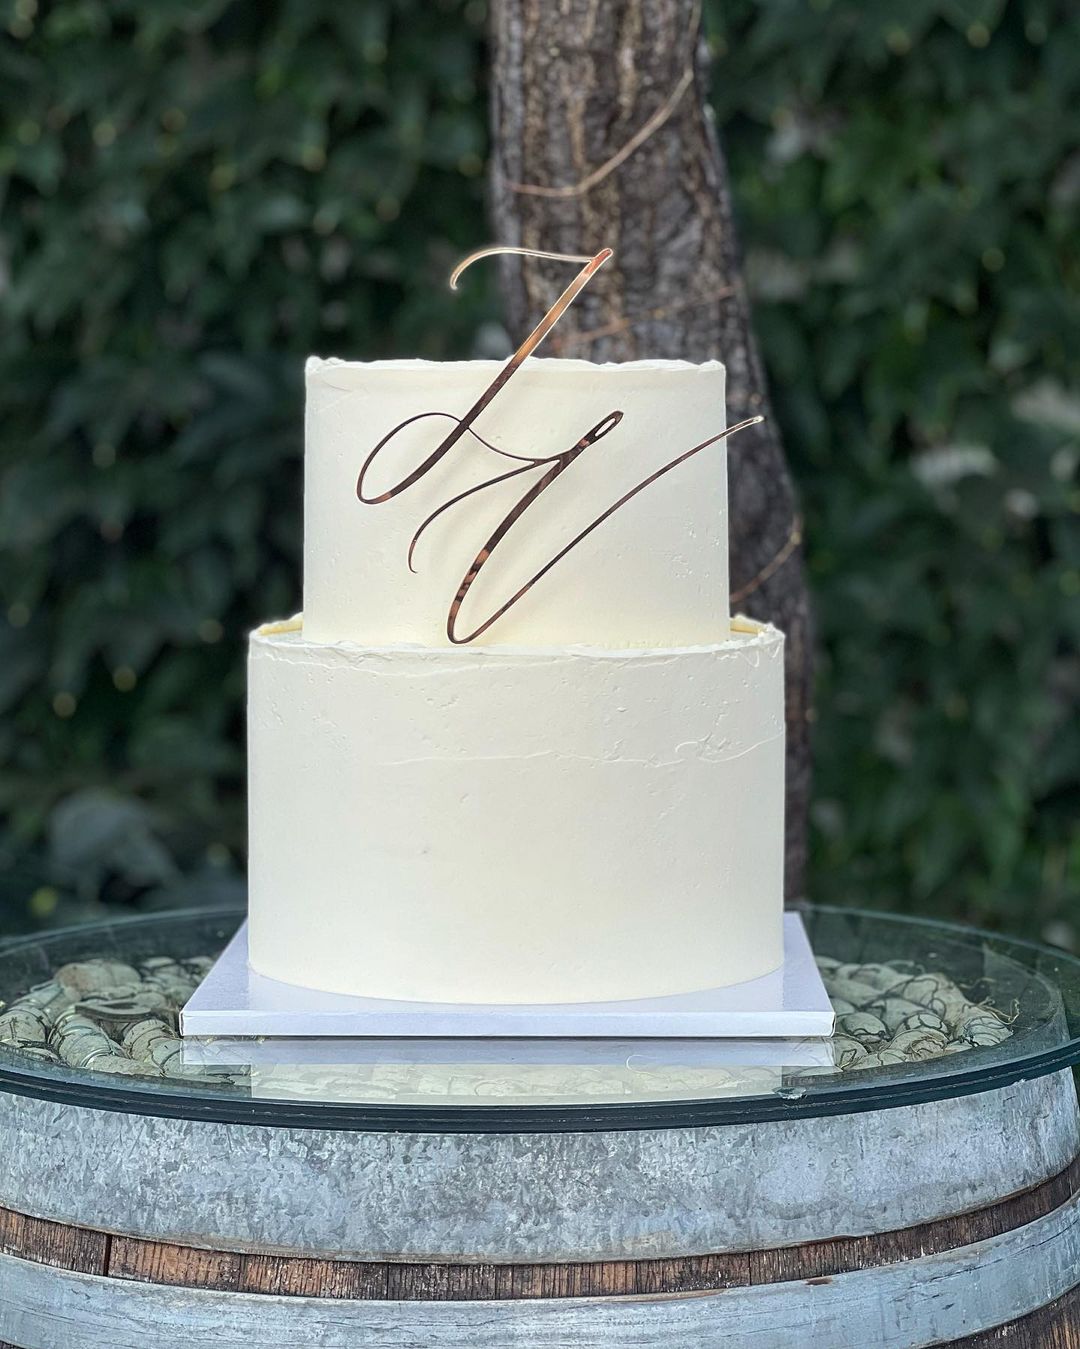 simple 2 tier wedding cake with laser cut rose gold mirror name sign topper via domcine_laskonky